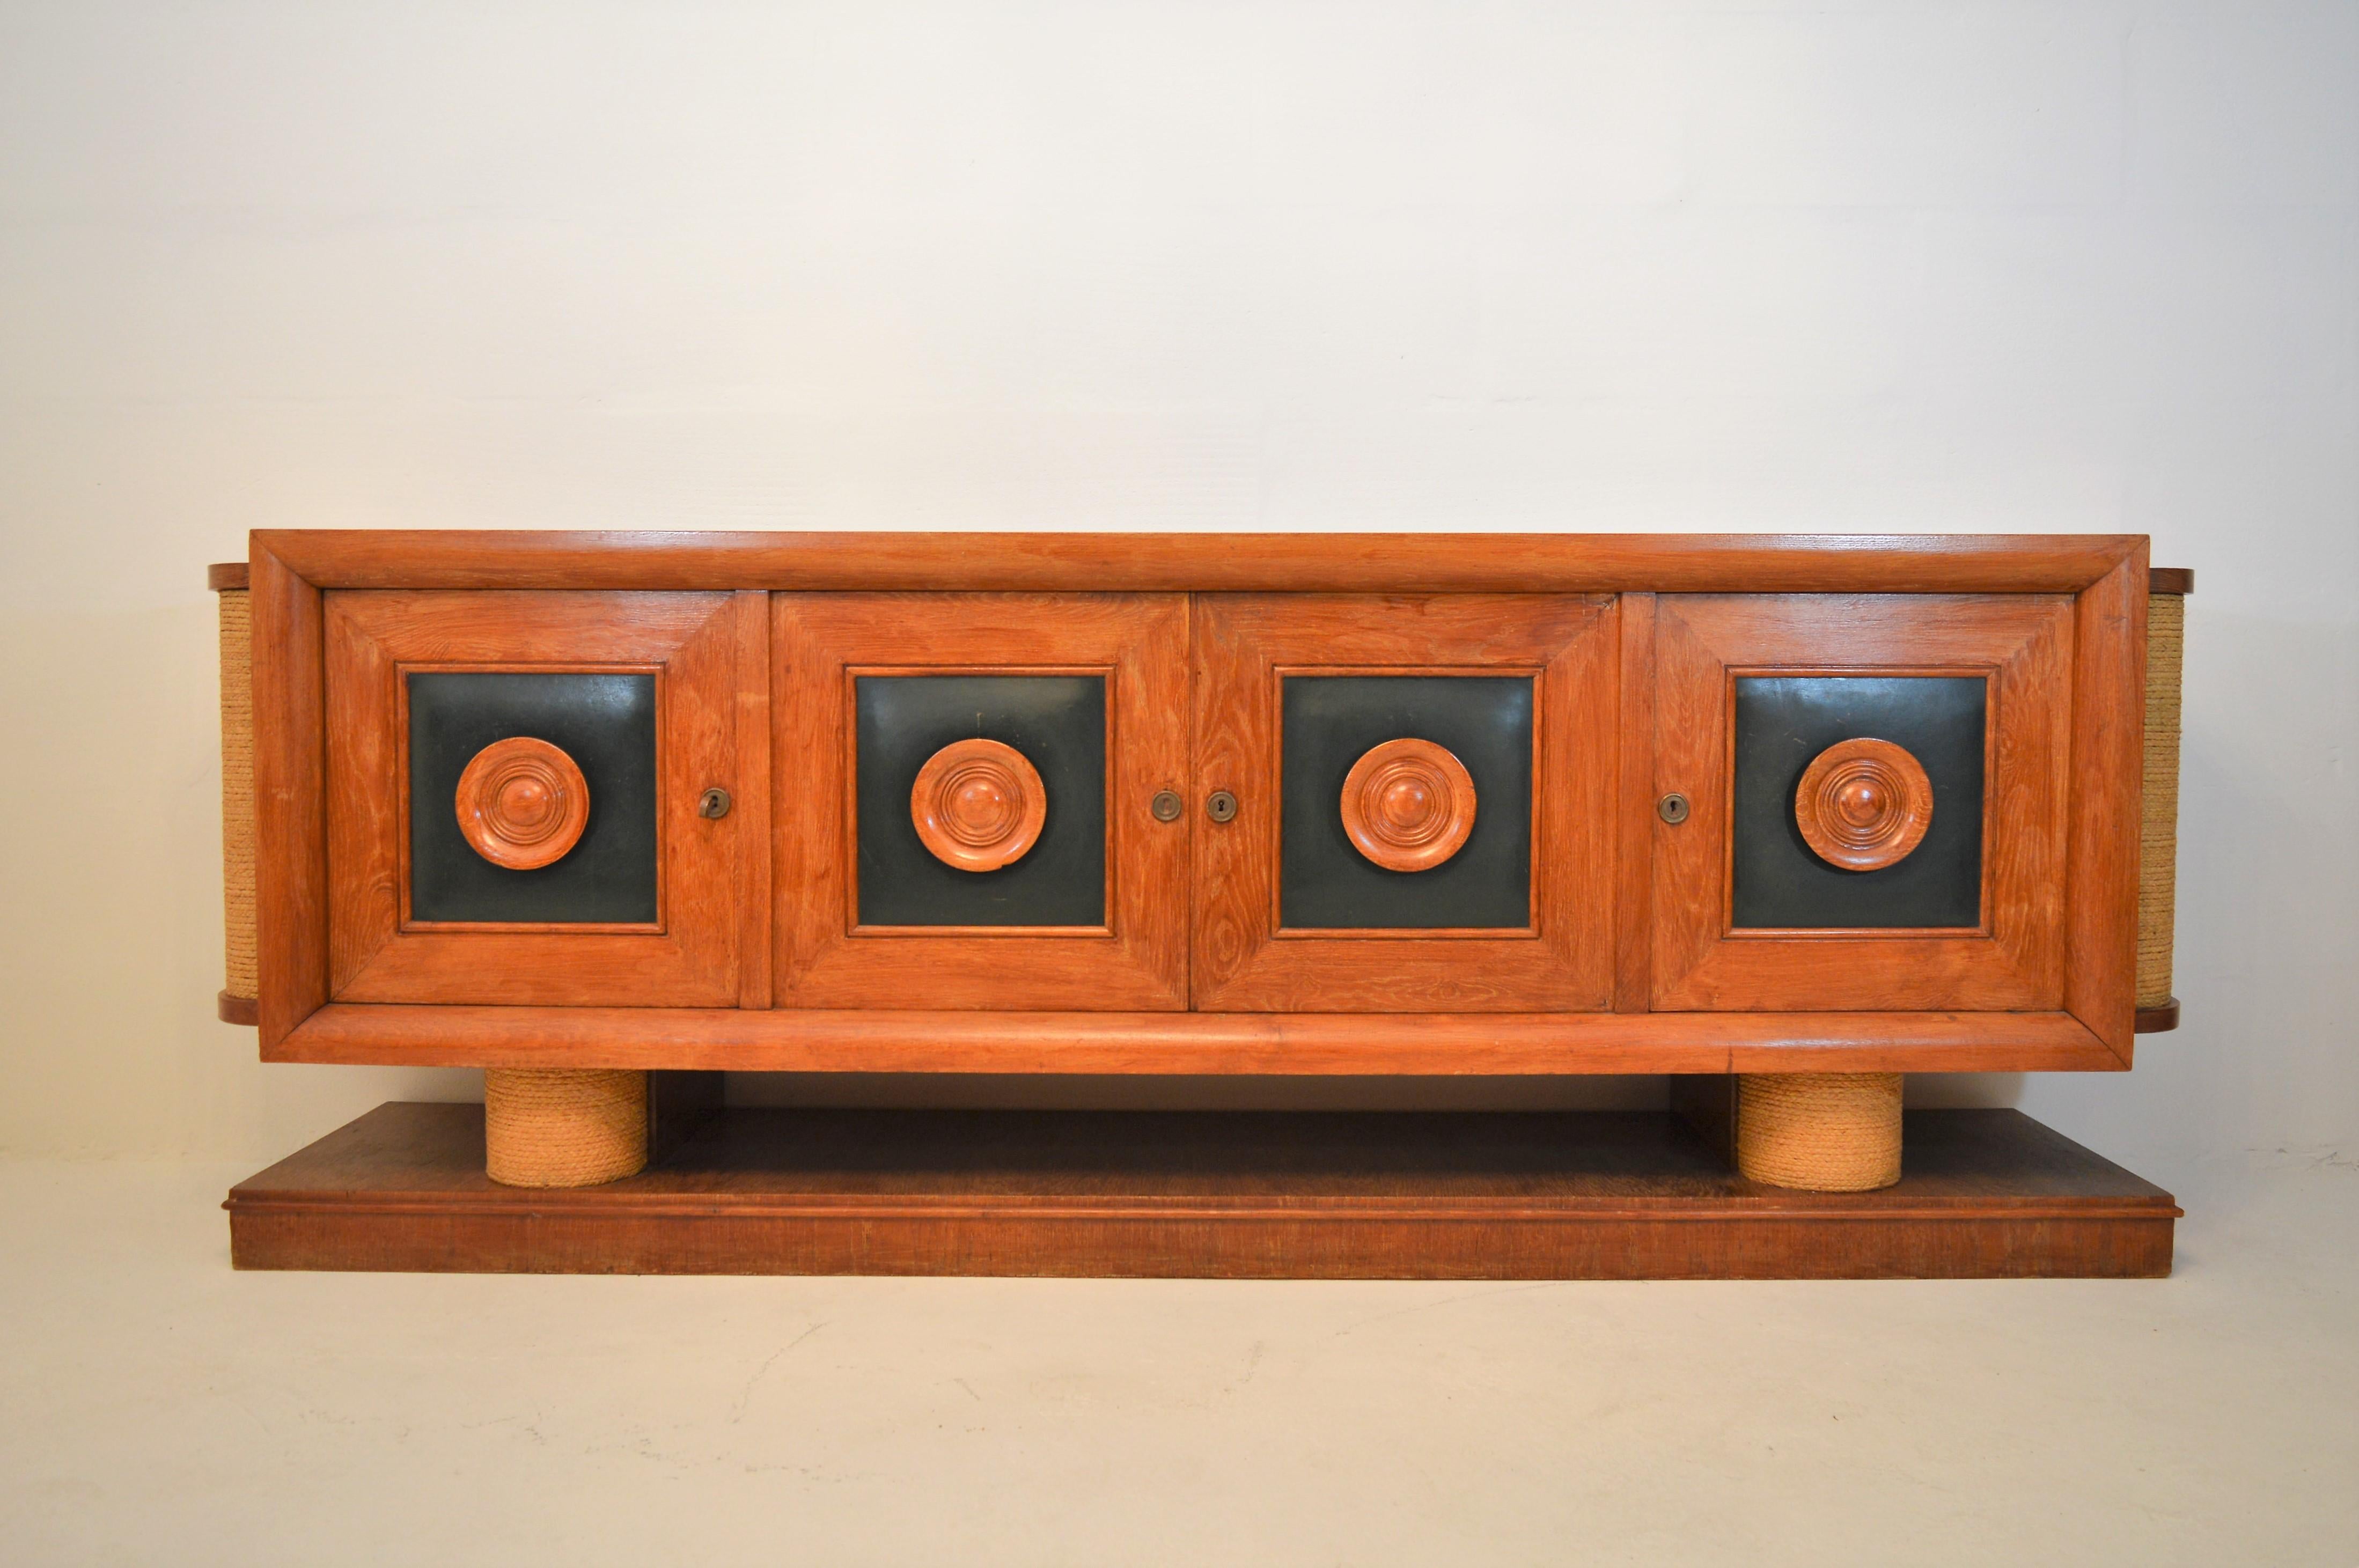 Very exclusive sideboard in oak, green leather and rope, created by the French designers Audoux and Minet in 1940.The sideboard is in a good, but unrestored condition with some minor faults.
 